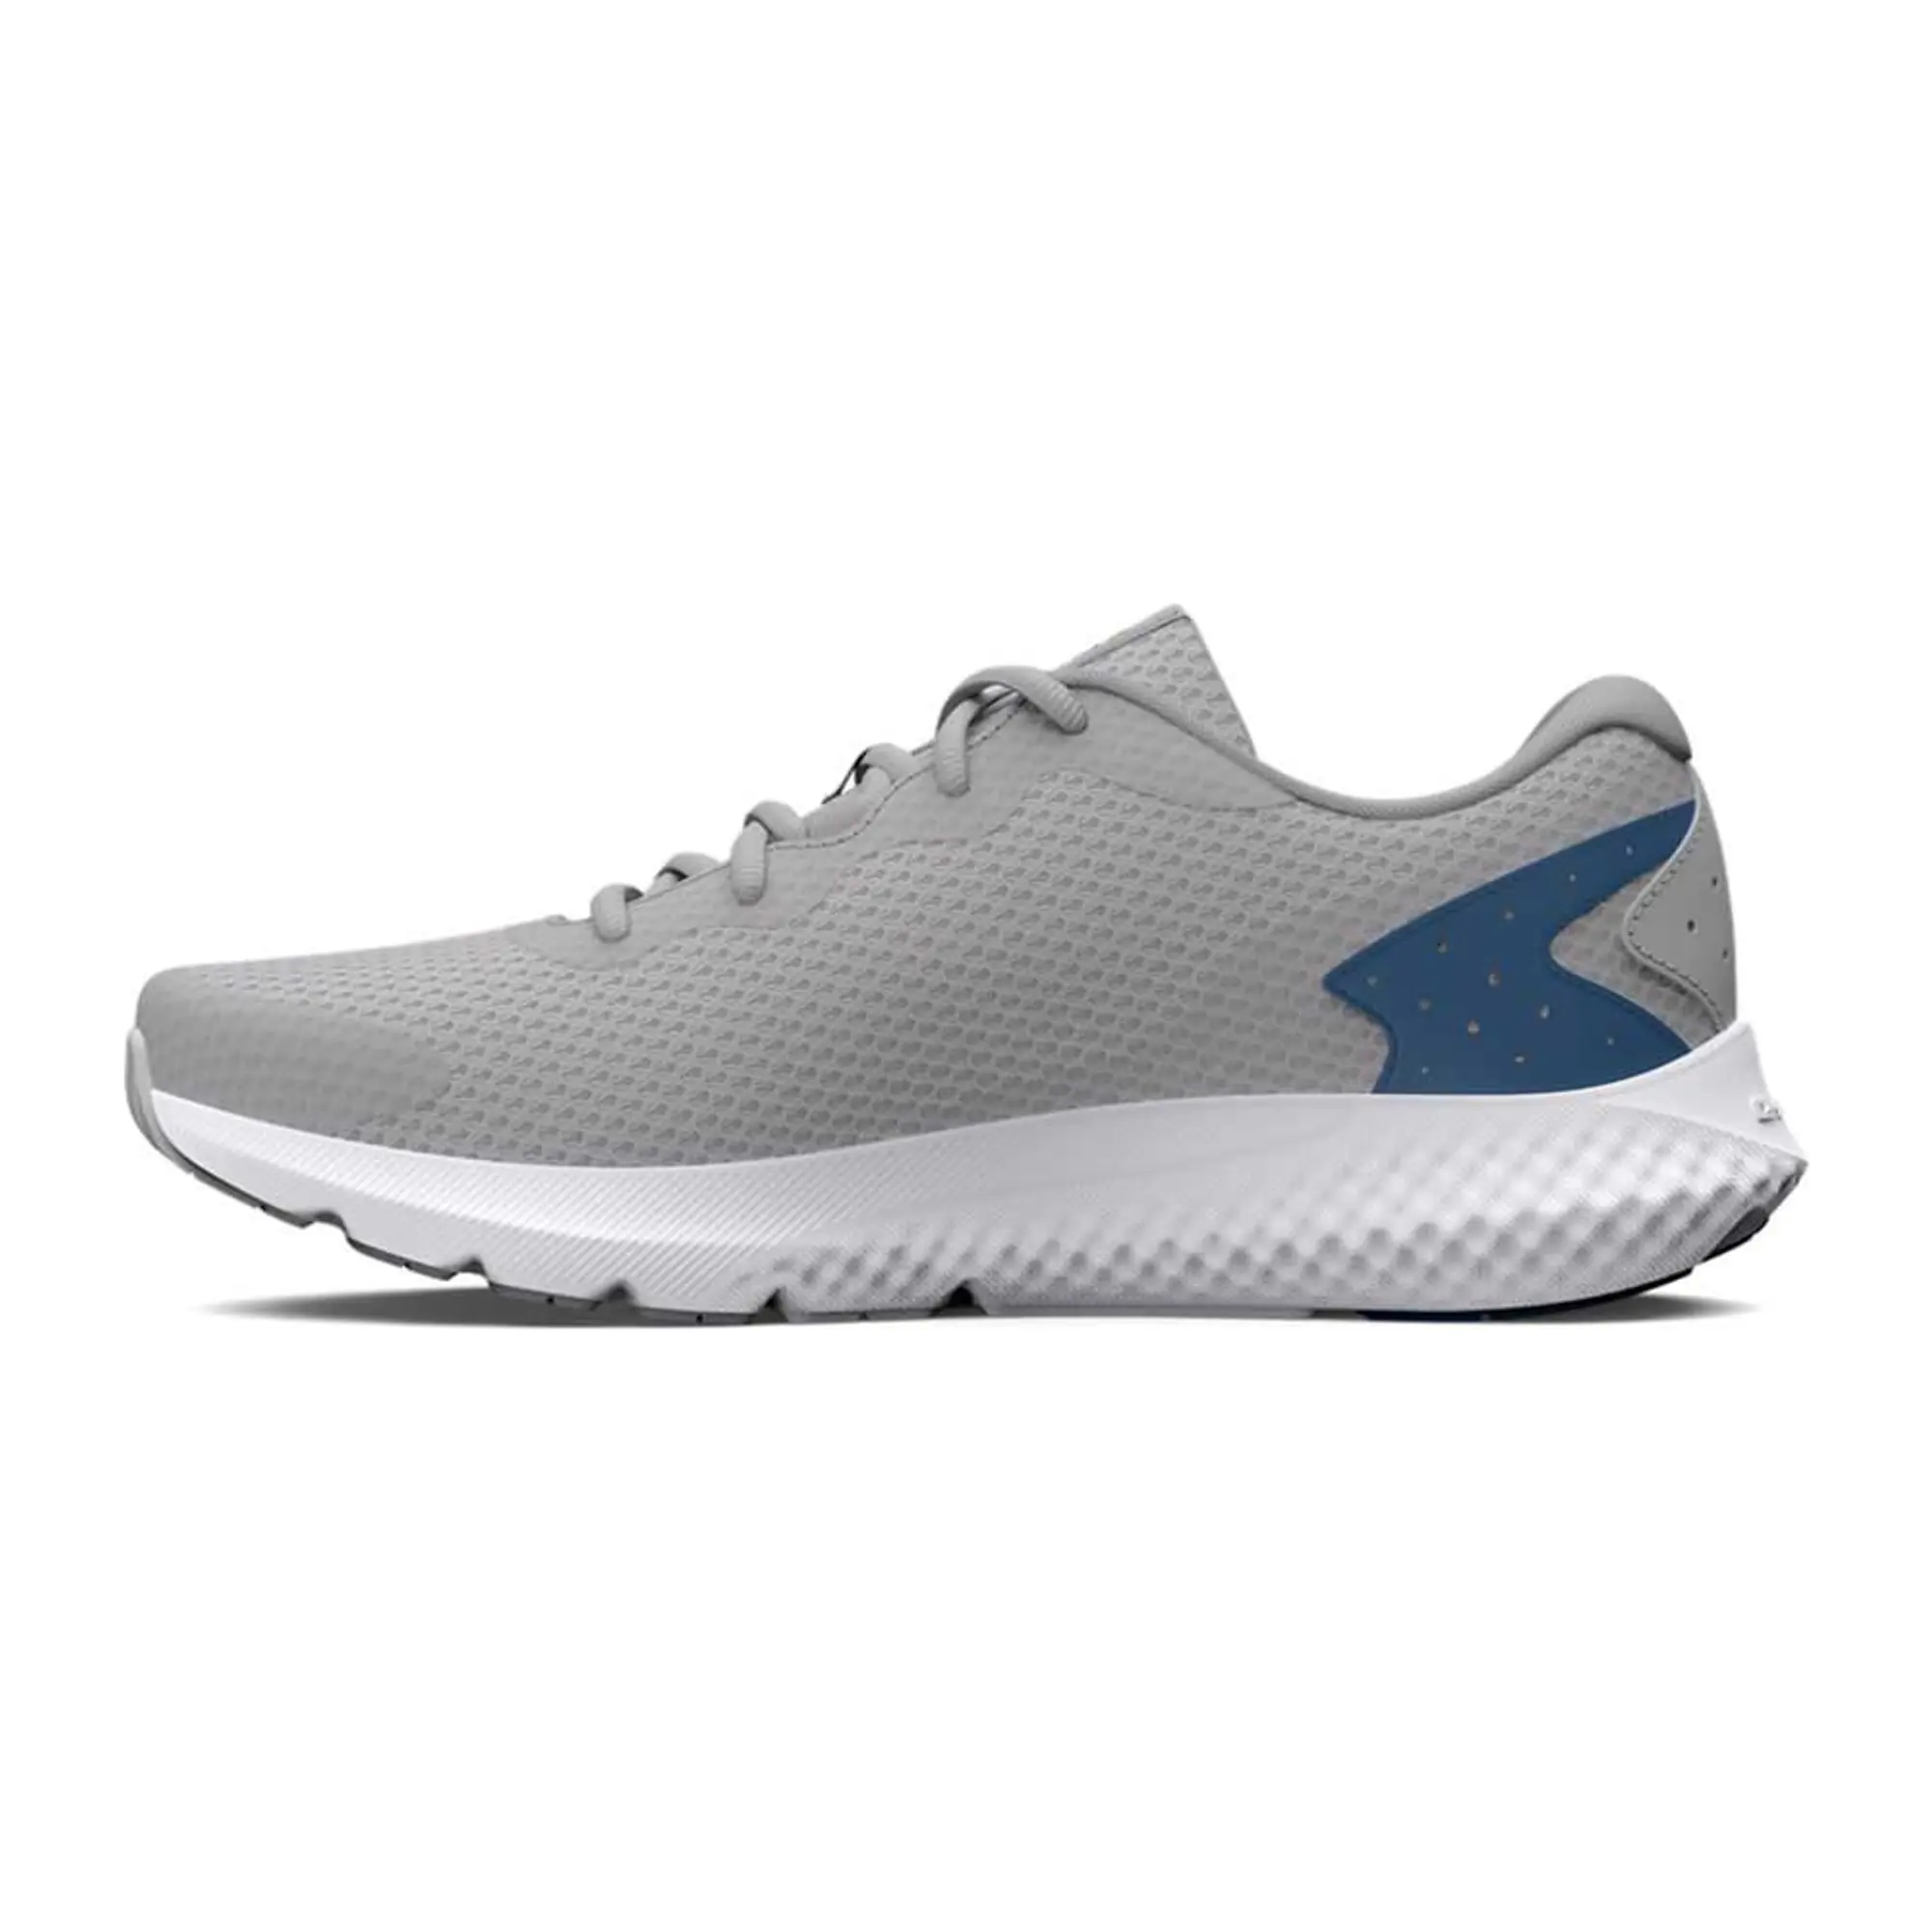 Under Armour Charged Rogue 3 Running Shoes  EU 47 1/2 Man -